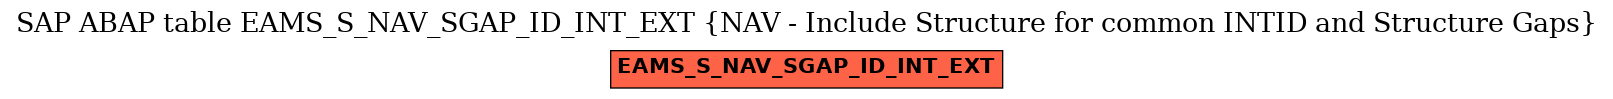 E-R Diagram for table EAMS_S_NAV_SGAP_ID_INT_EXT (NAV - Include Structure for common INTID and Structure Gaps)